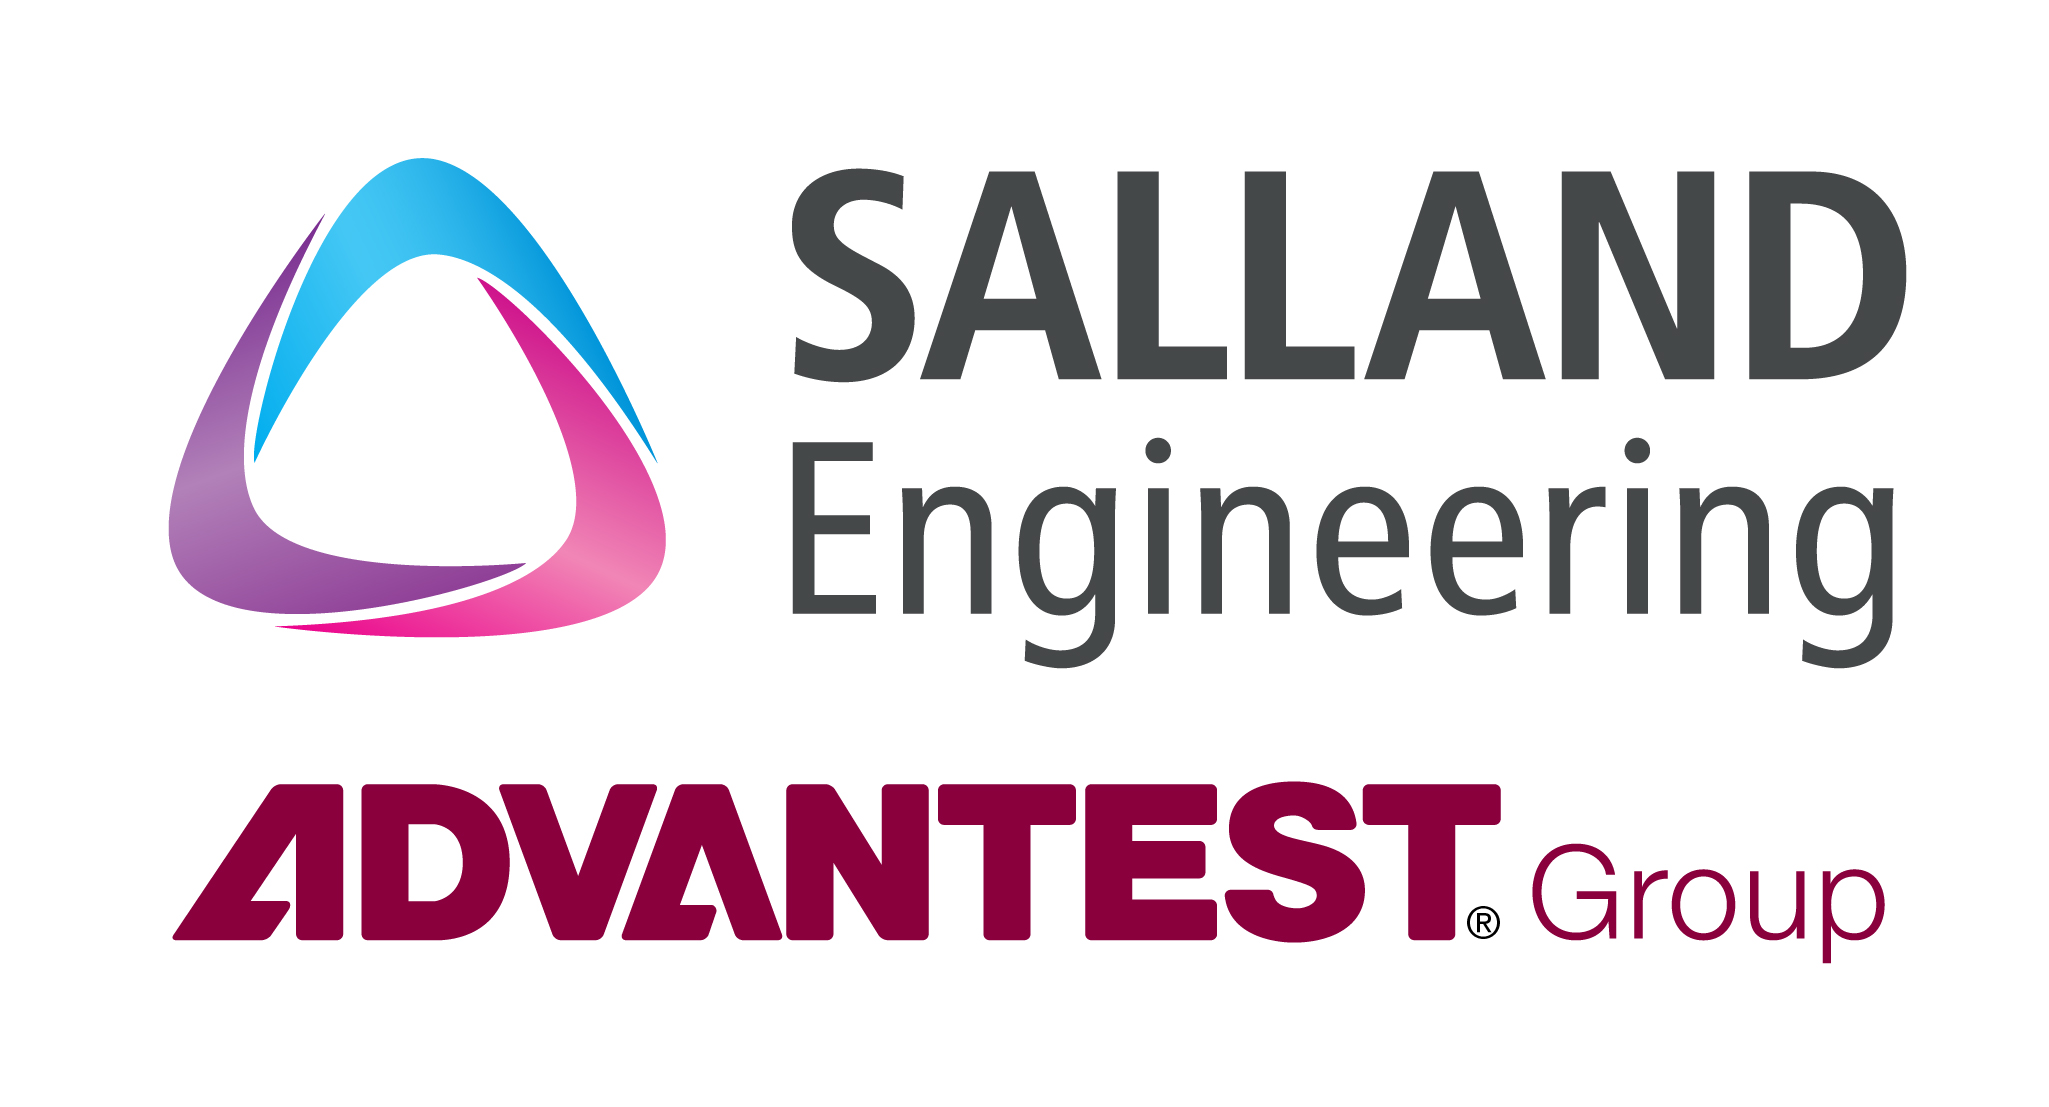 For more than 30 years, Salland Engineering offers a broad range of experience and know-how in the fields of mixed signal, RF, high-speed, high-density and high accuracy test solutions.

The unique combination of test application development, instrument solution development and production test services make us your leading test technology and engineering partner

for semiconductor test and test & measurement solutions. Salland Engineering is headquartered in Zwolle - The Netherlands, ISO 9001:2015 certified and operates worldwide.




https://www.salland.com/